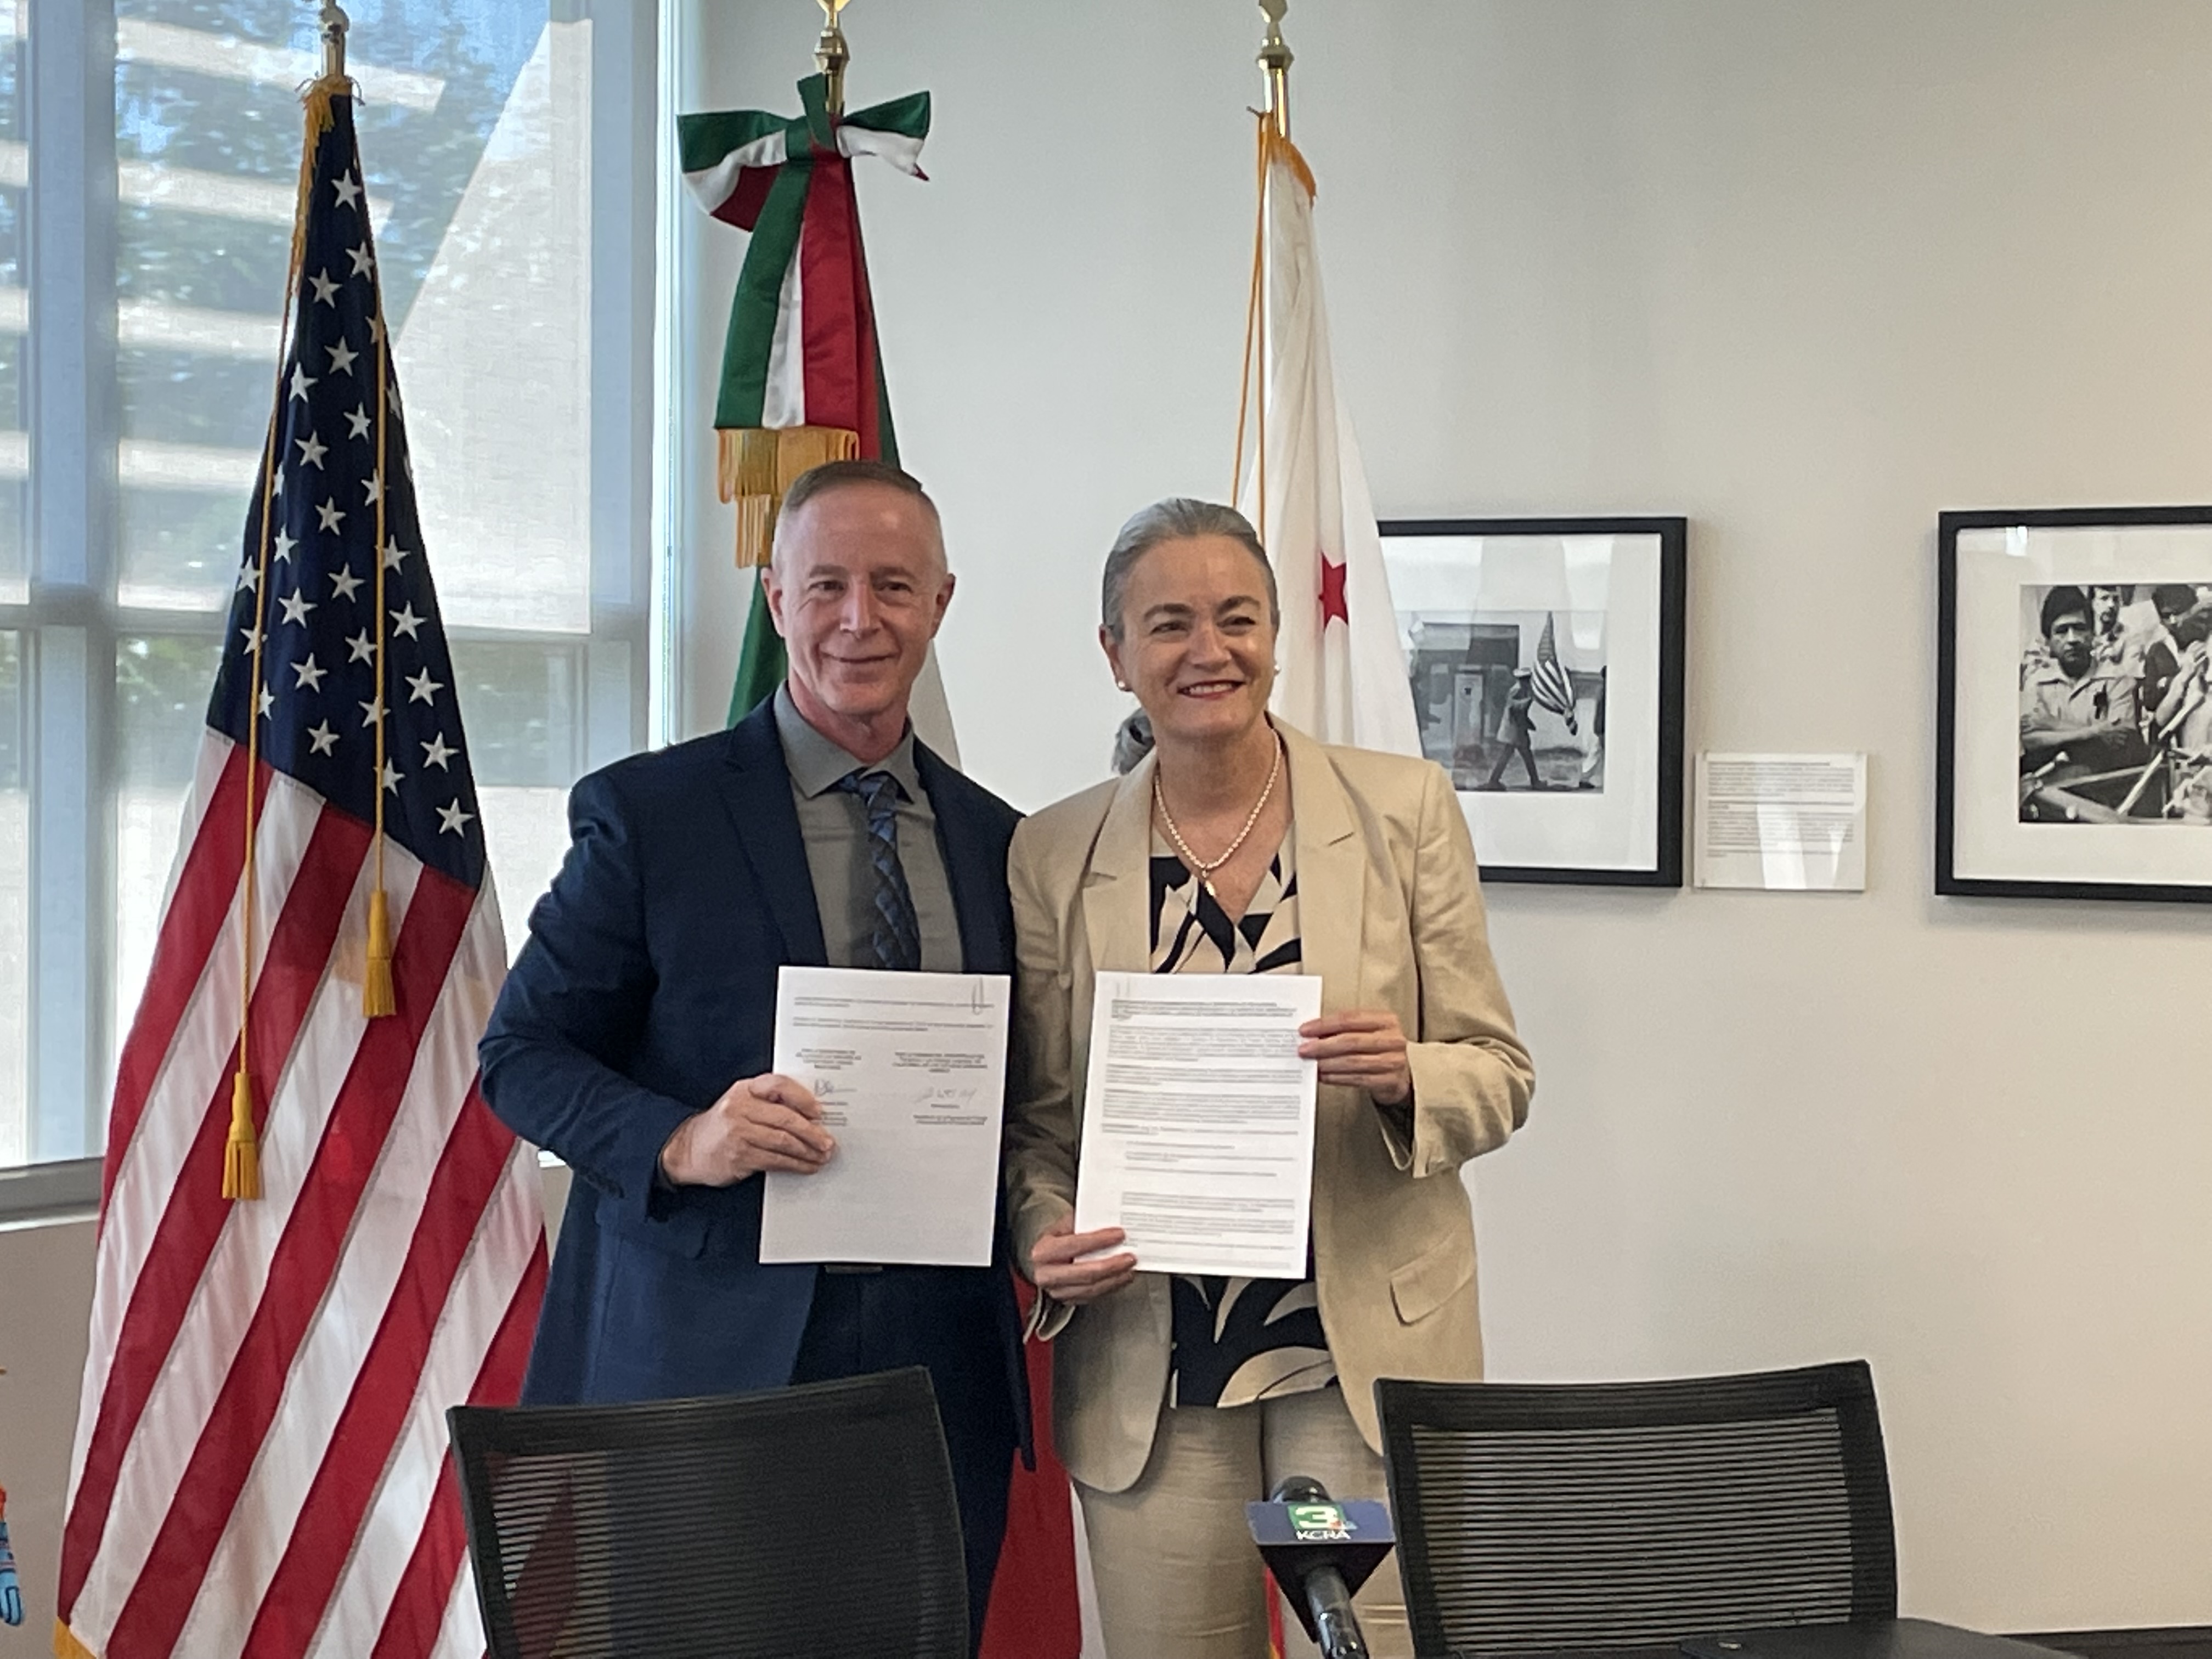 California Labor Secretary Stewart Knox and Consul General Liliana Ferrer holding the signed MOU.